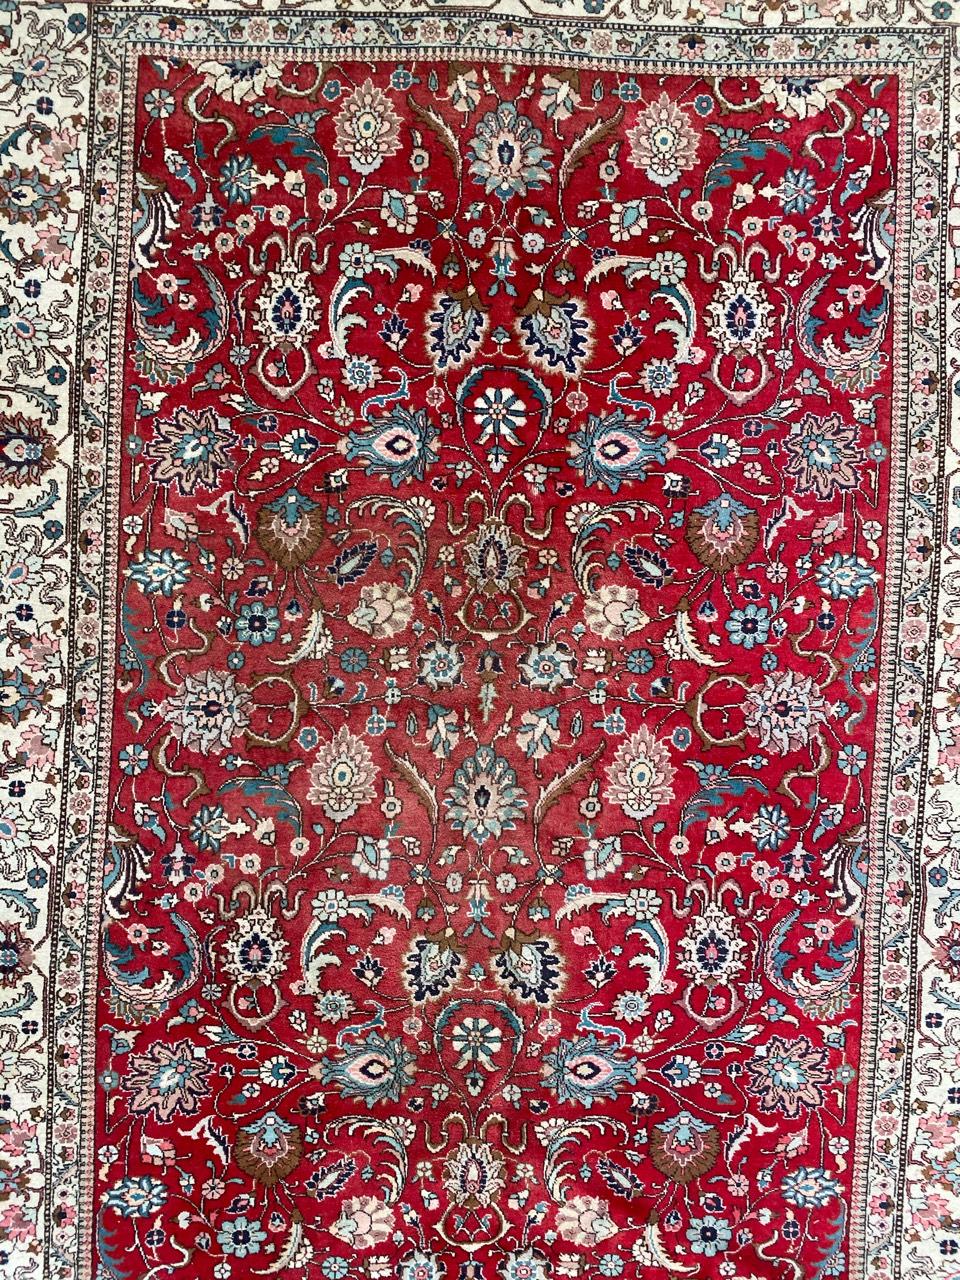 Beautiful large rug with nice Persian design and nice colors with red, blue, pink and brown, entirely hand knotted with wool velvet on cotton foundation.